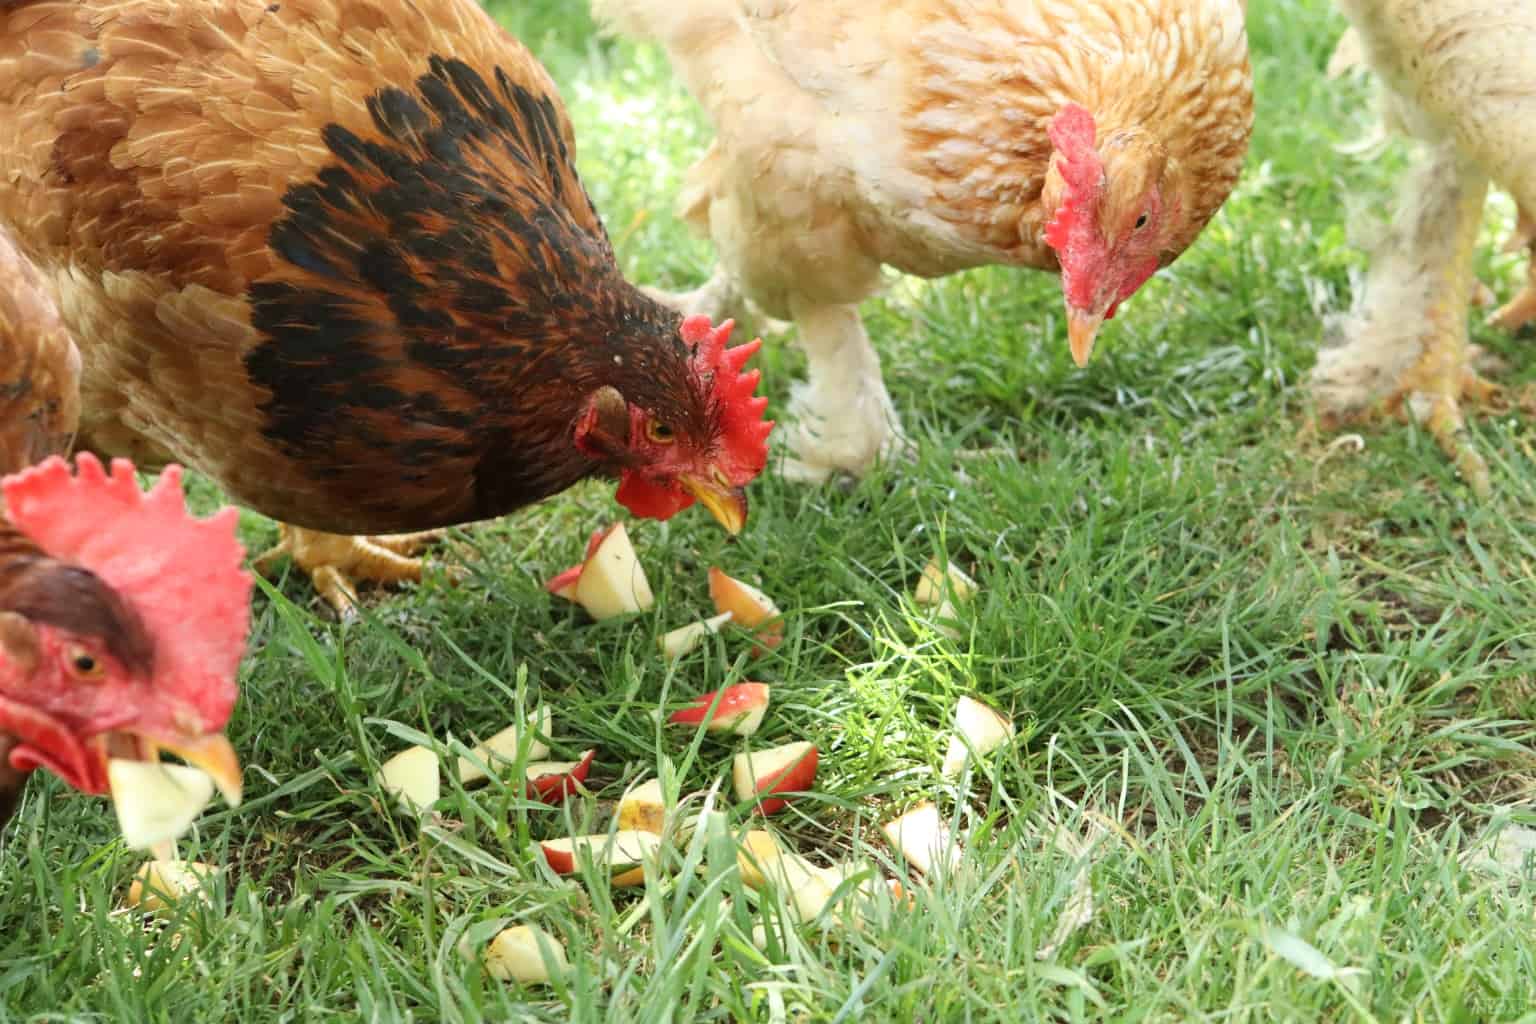 chickens eating apples